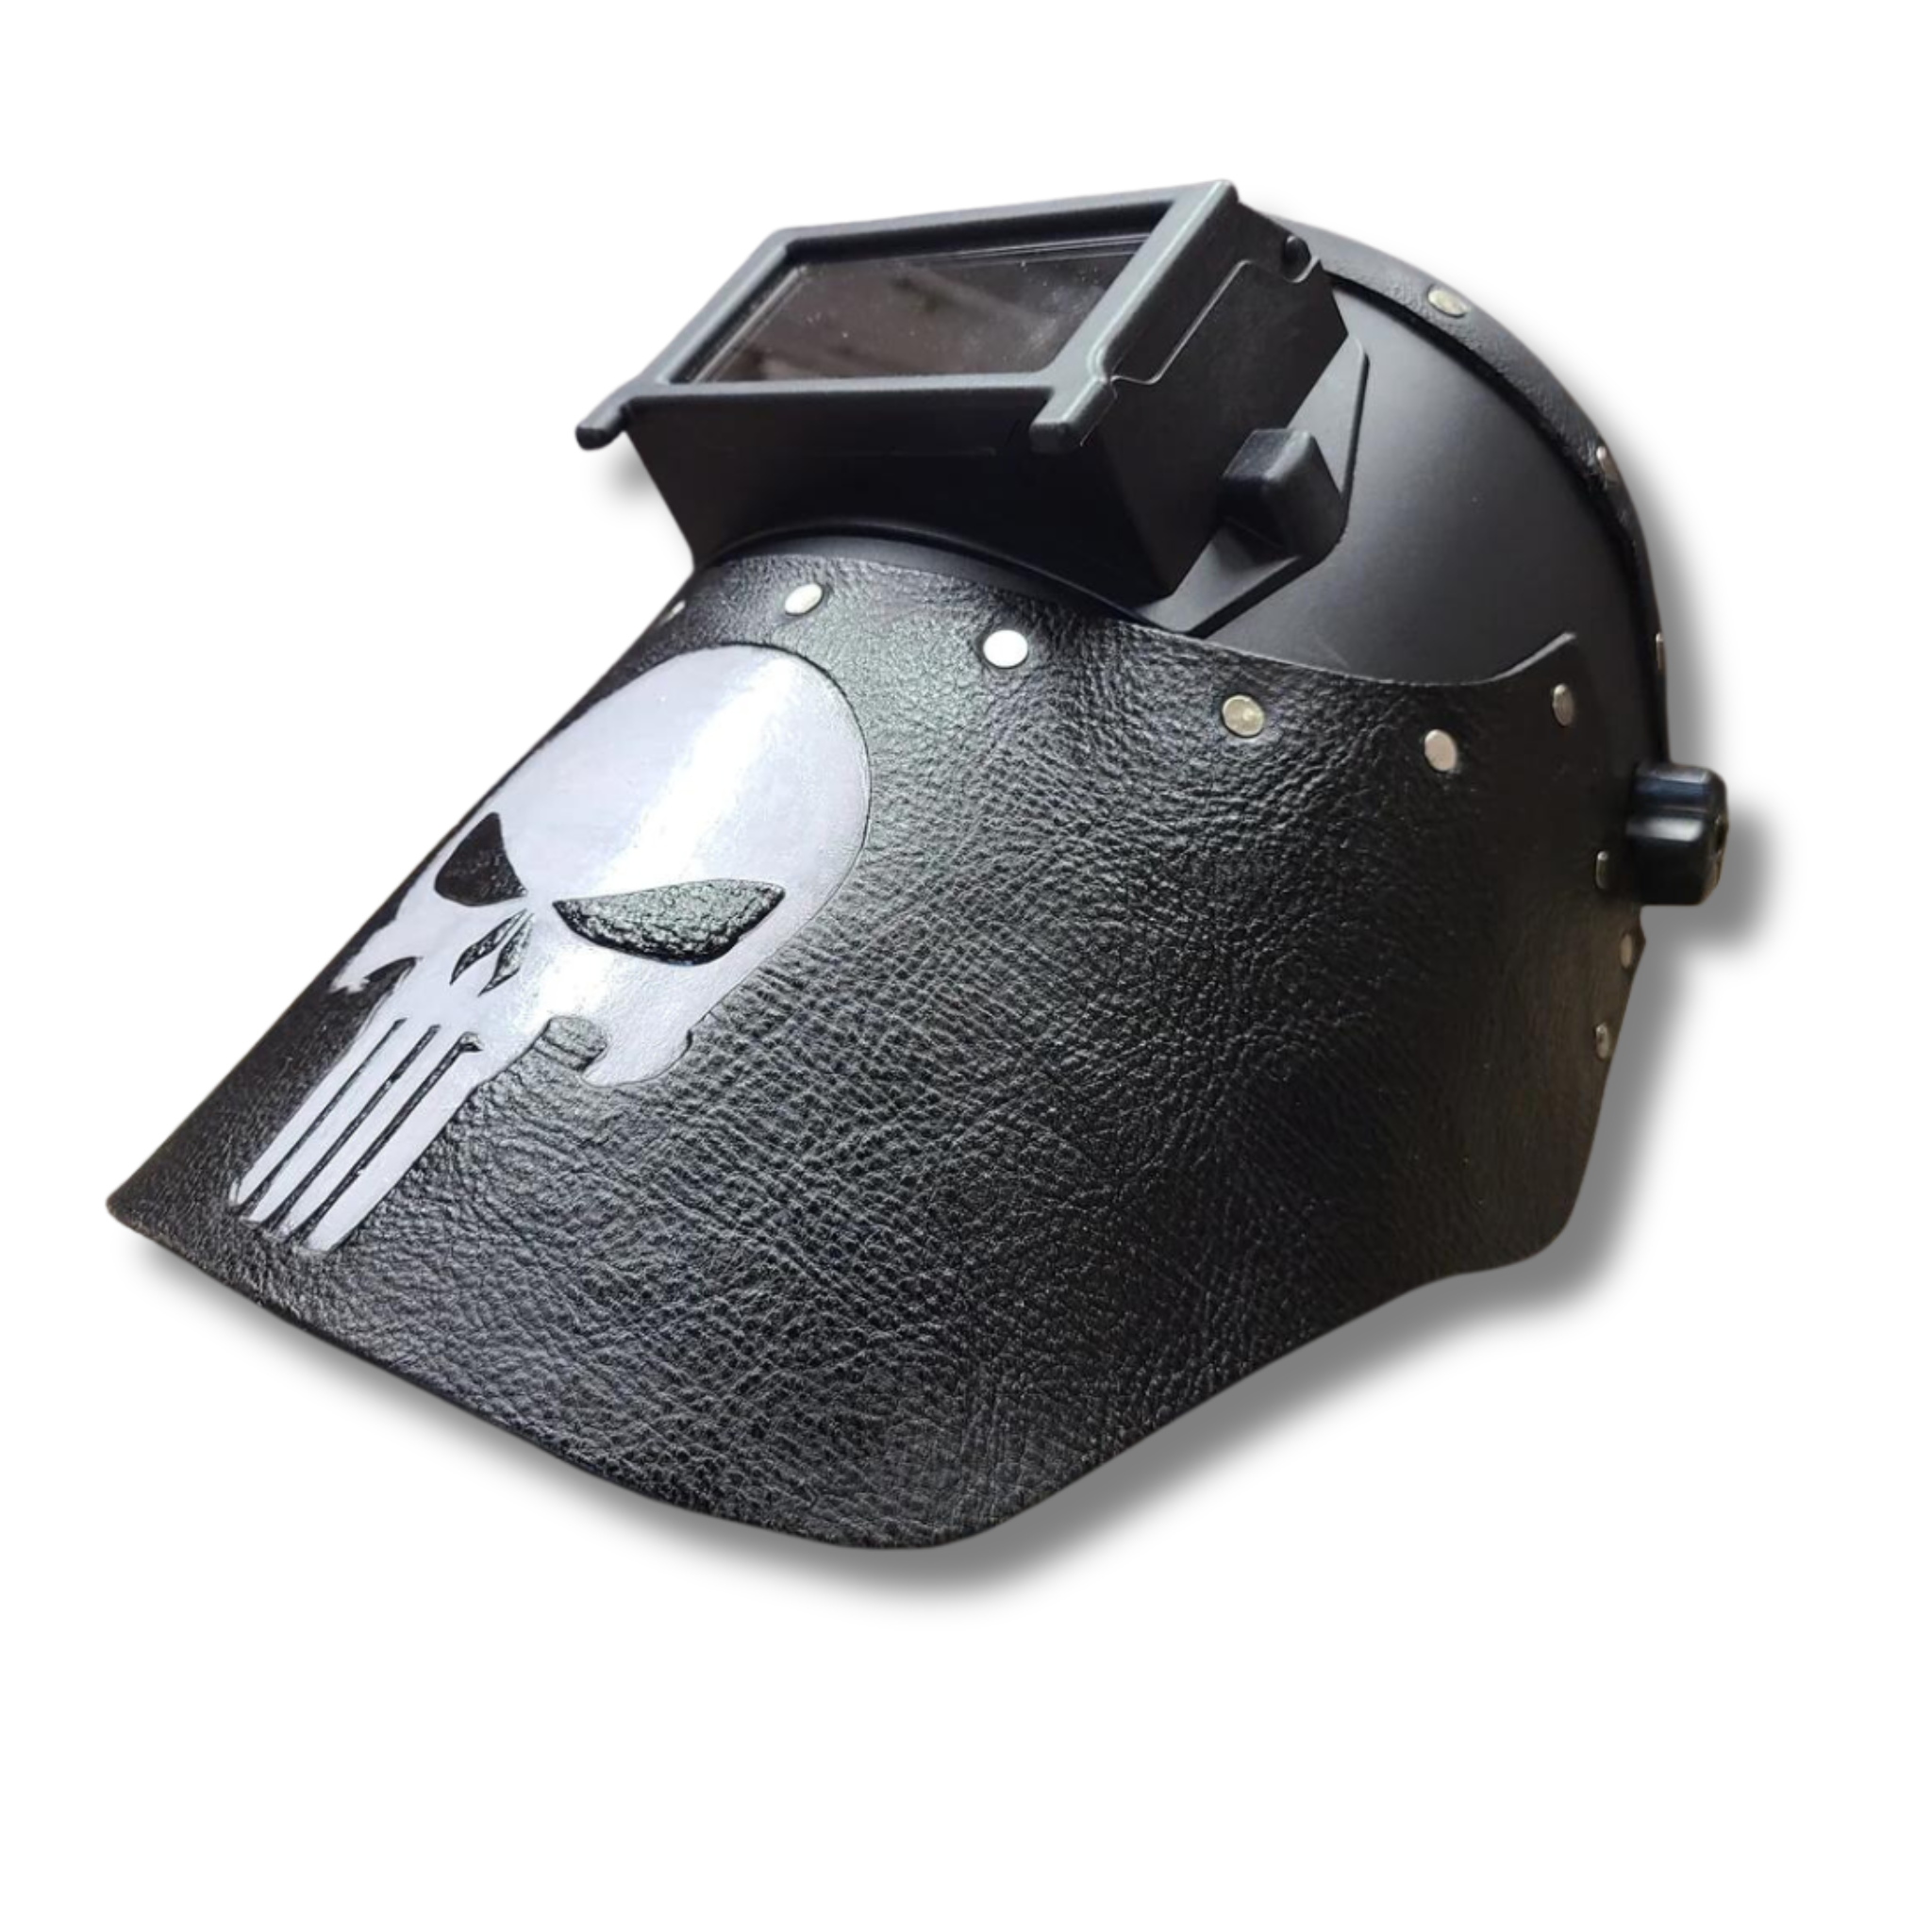 Outlaw Leather - Welding Hood - Original Punisher